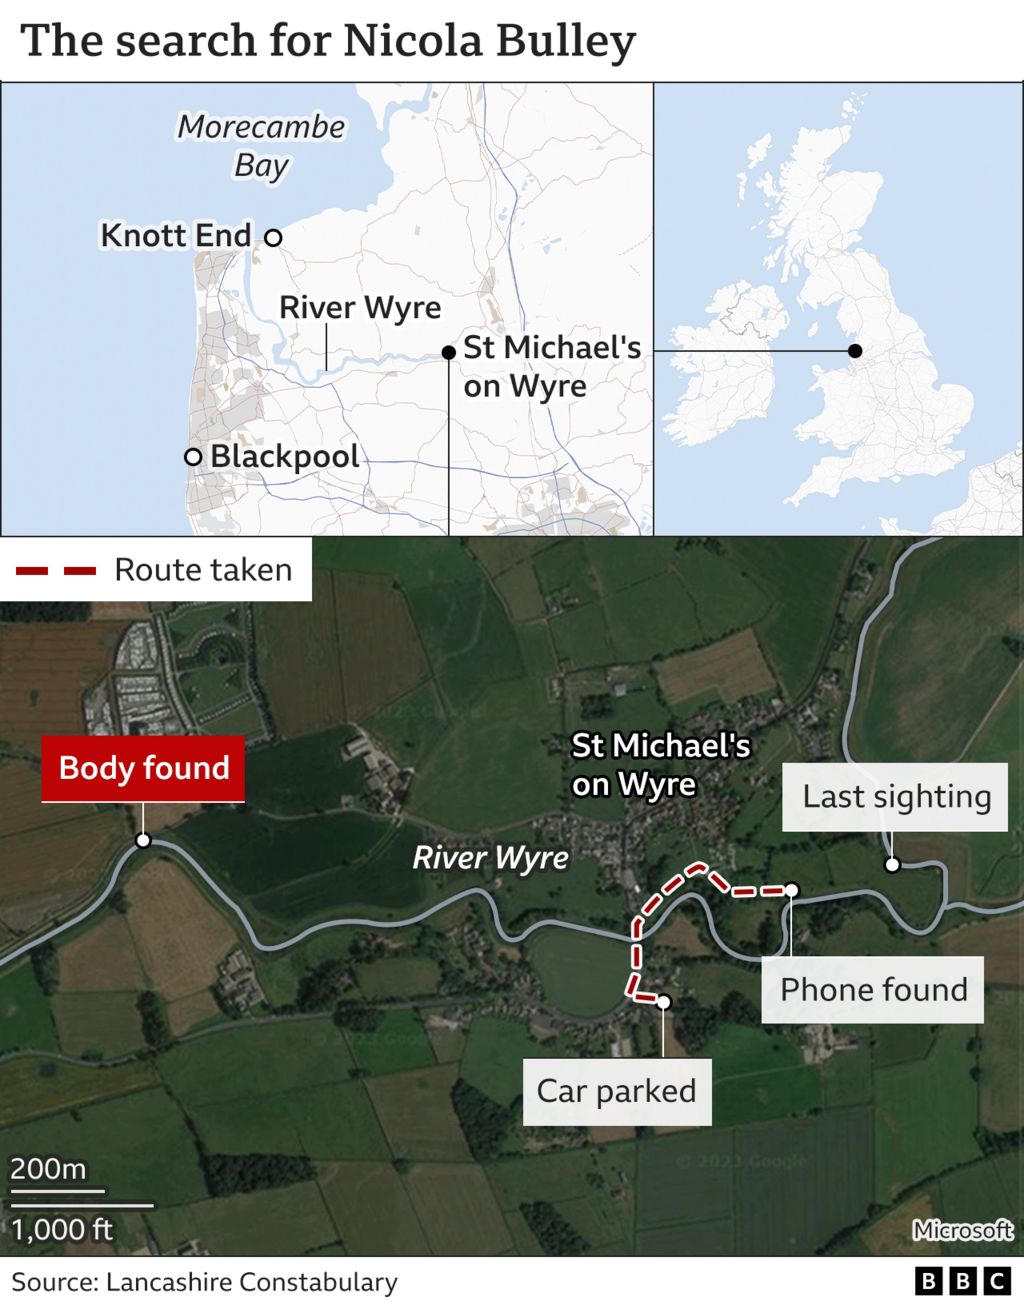 An aerial map showing key locations in the Nicola Bulley investigation